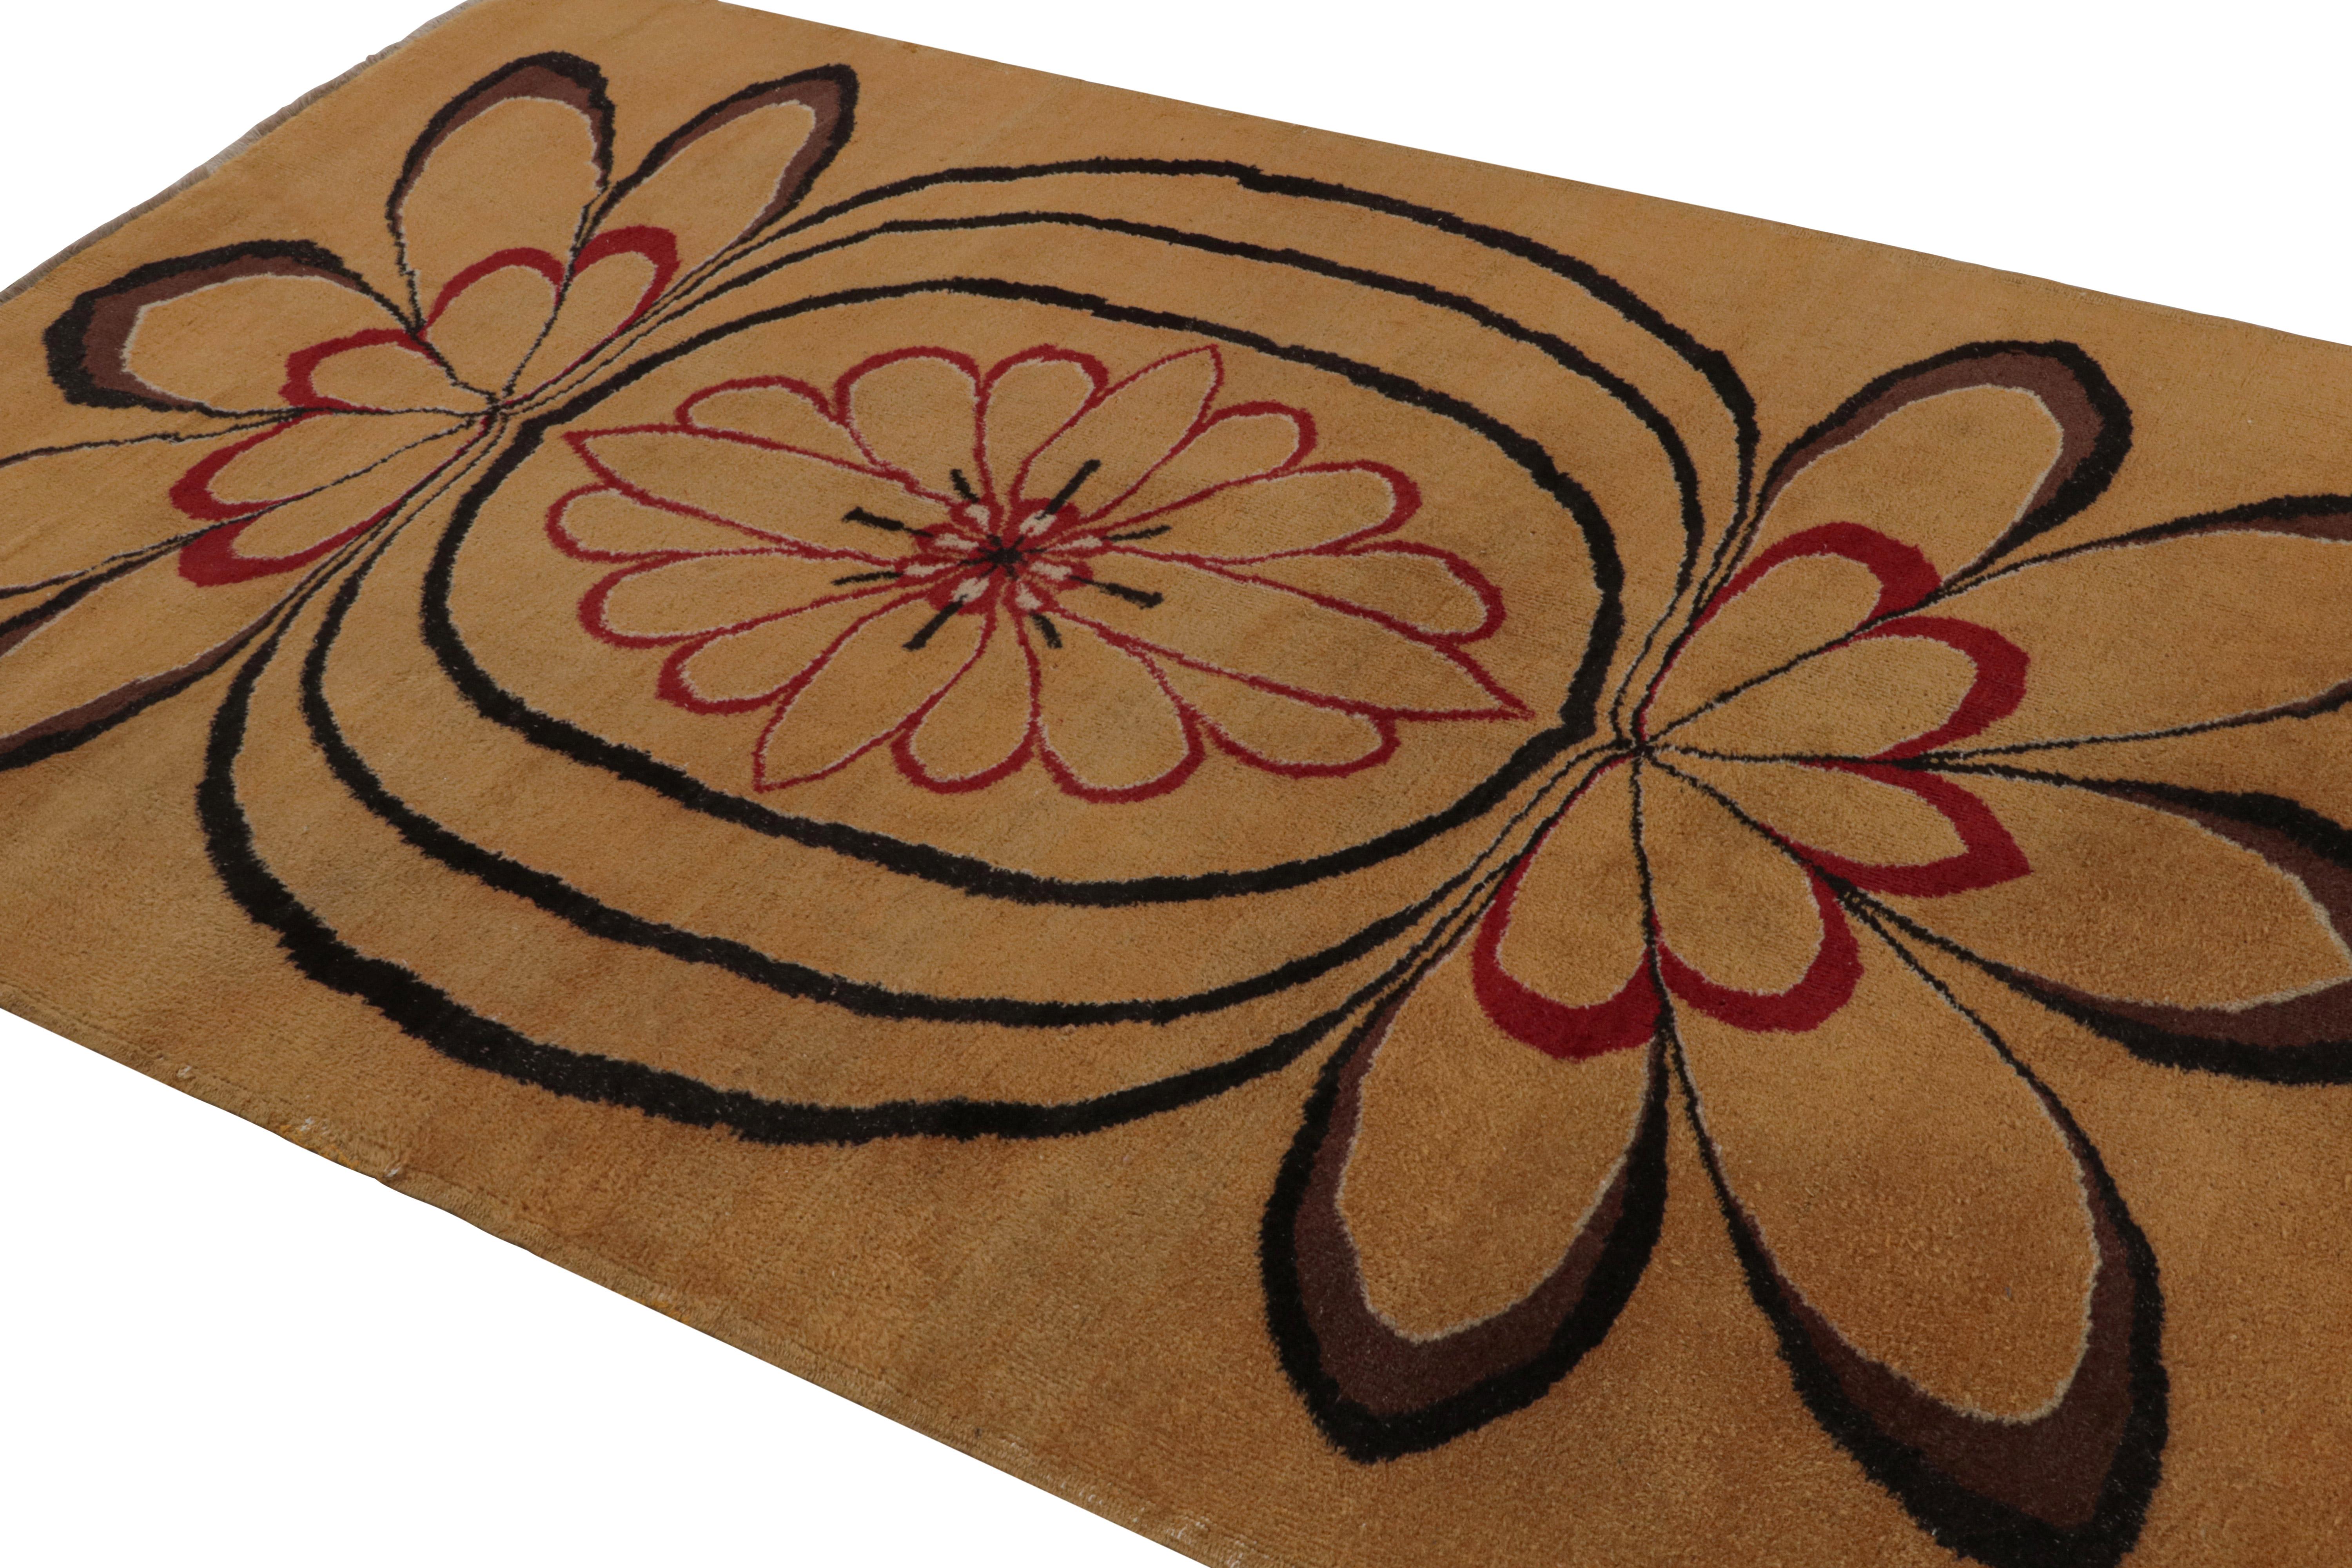 Hand-knotted in wool, circa 1960 - 1970, this 6x8 vintage Müren Art Deco rug is an exciting new addition to the Rug & Kilim Collection. Its design in Ochre with geometric patterns in red and black, is a more minimal take on the French Art Deco